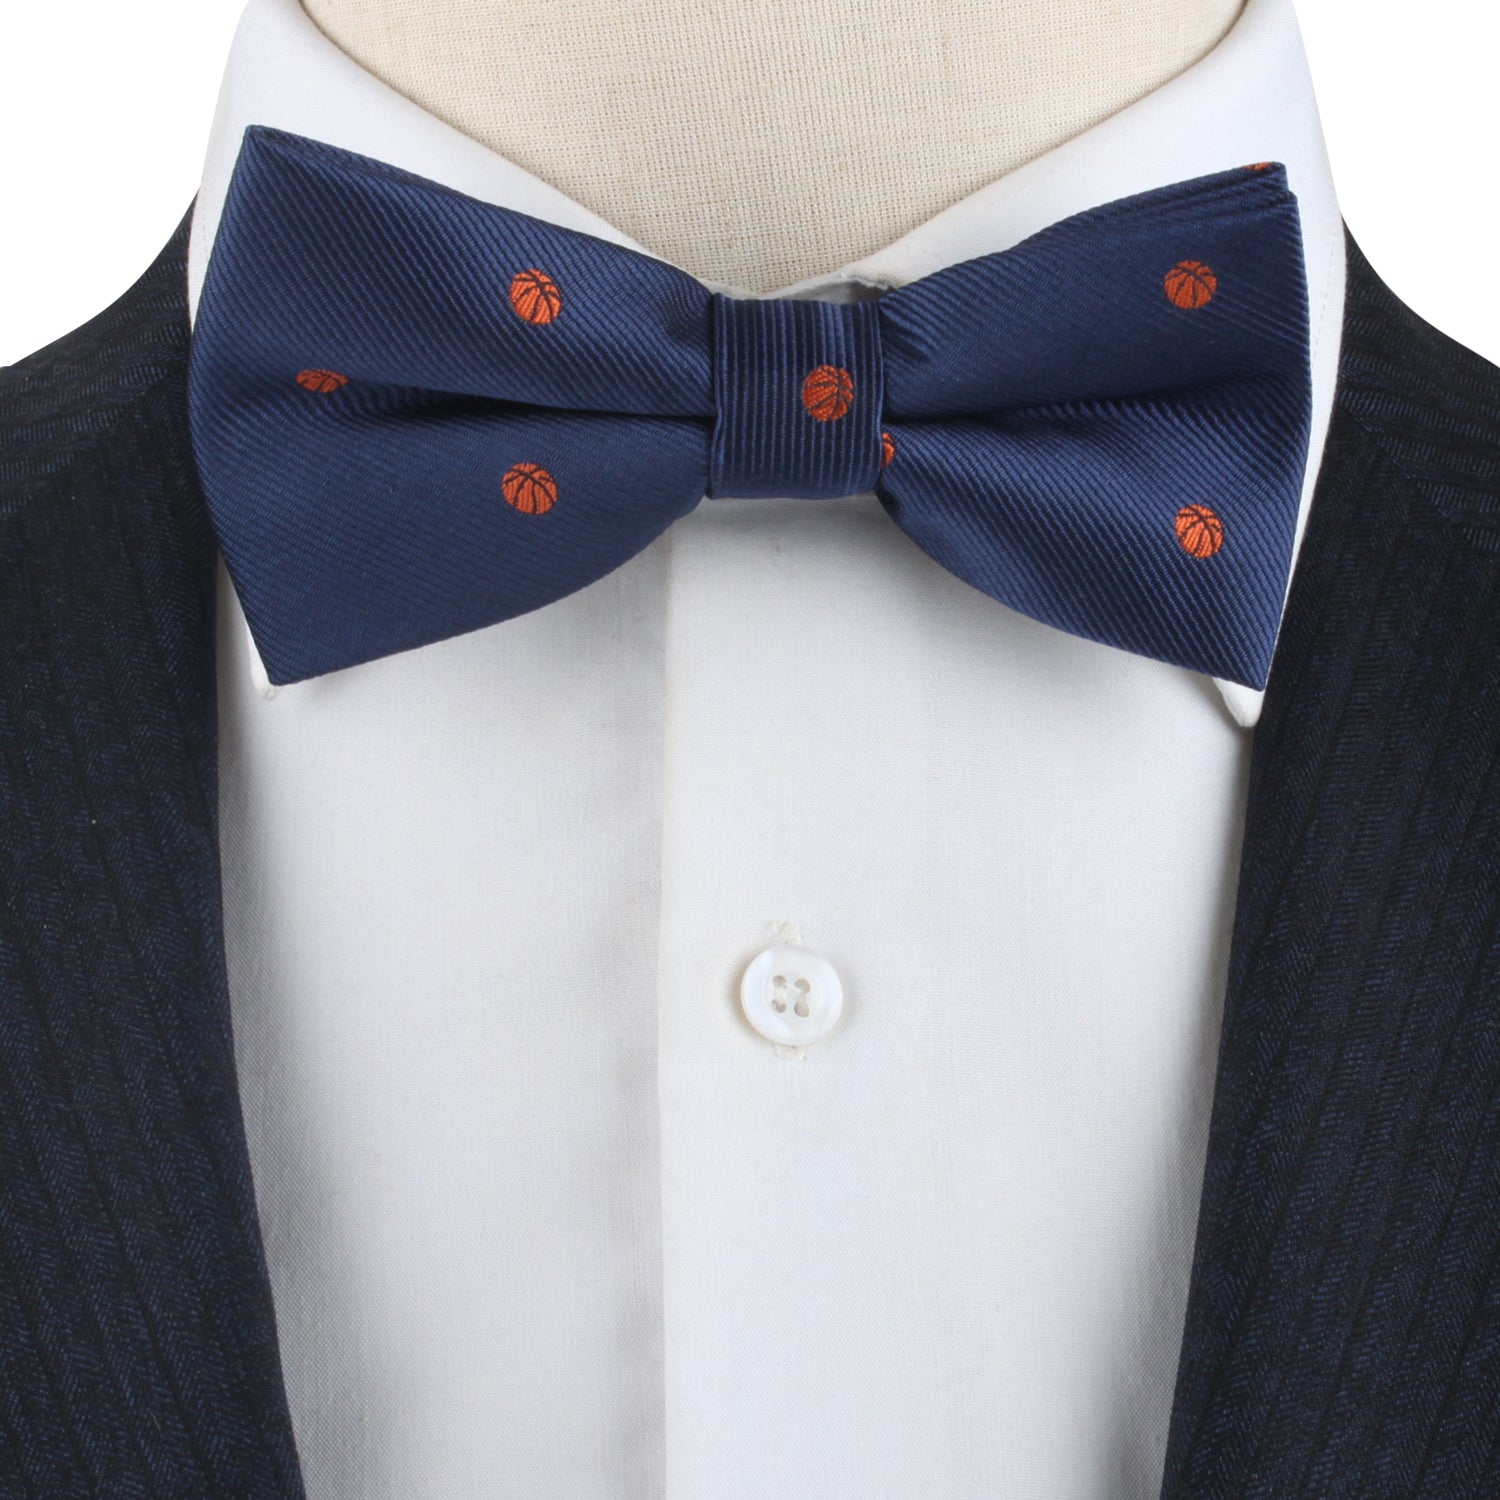 A mannequin wearing a Basketball Bow Tie with orange dots in a fashionable manner.